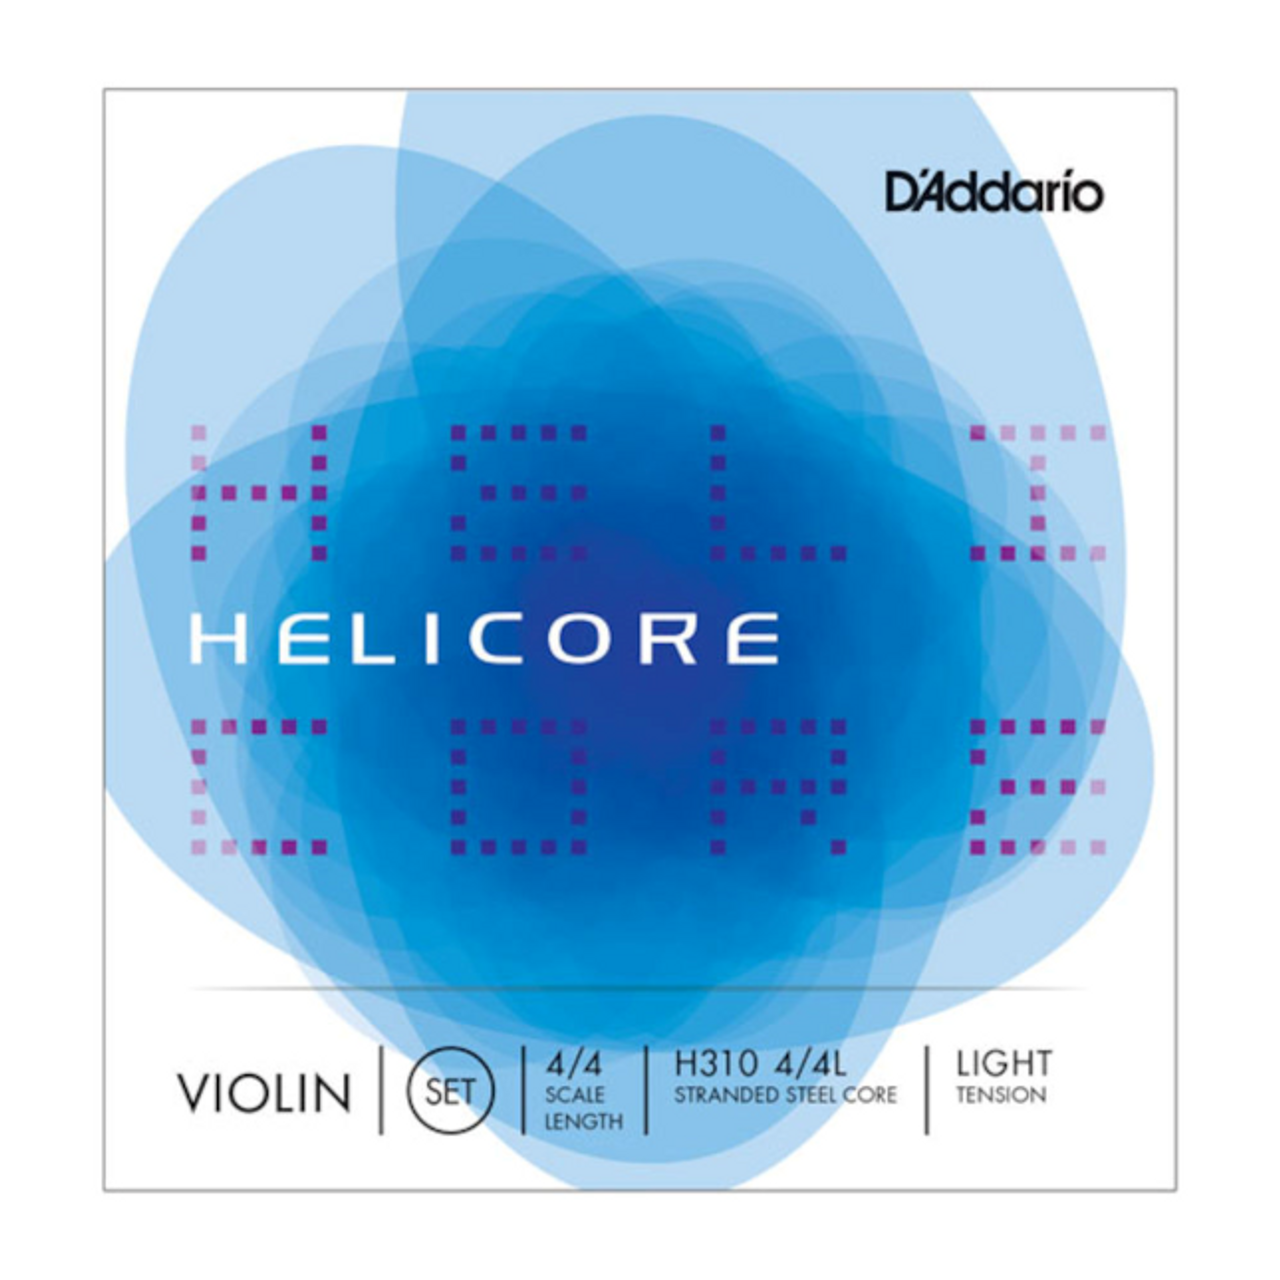 Helicore Violin String Set, 4/4 Scale, Light Tension